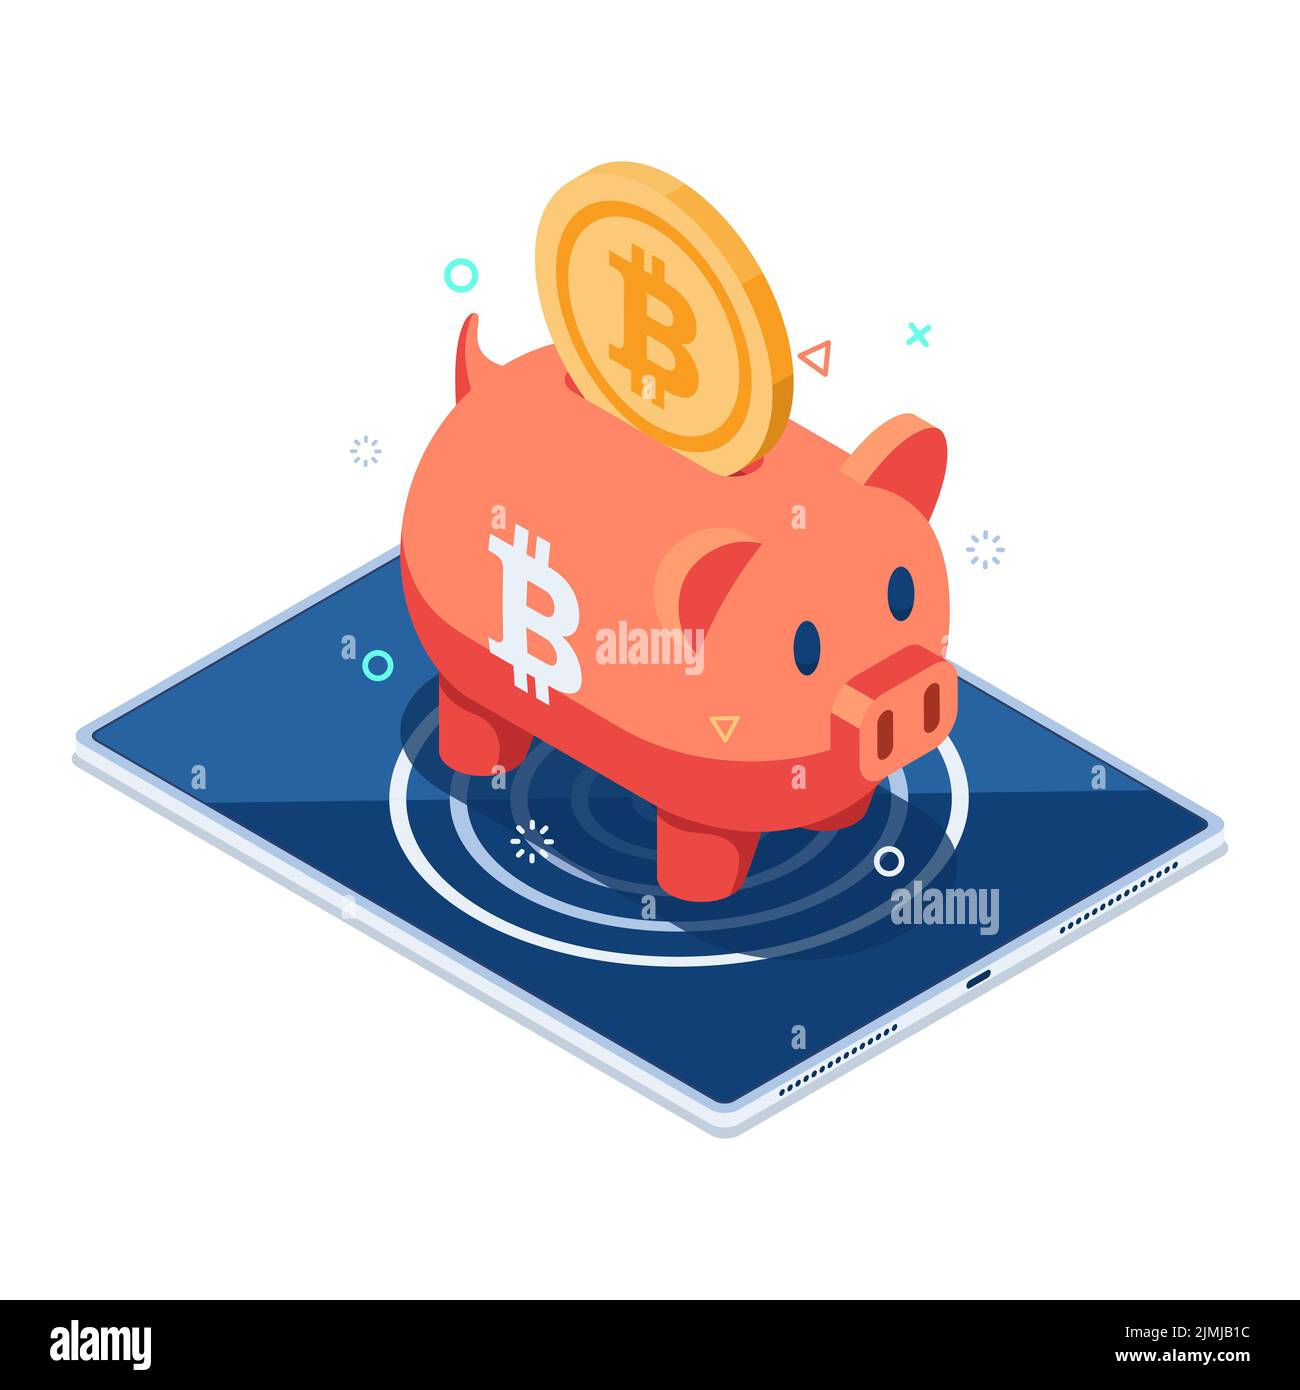 Flat 3d Isometric Bitcoin Piggy Bank on Digital Tablet. Bitcoin Saving and Cryptocurrency Hardware Wallet Concept. Stock Vector